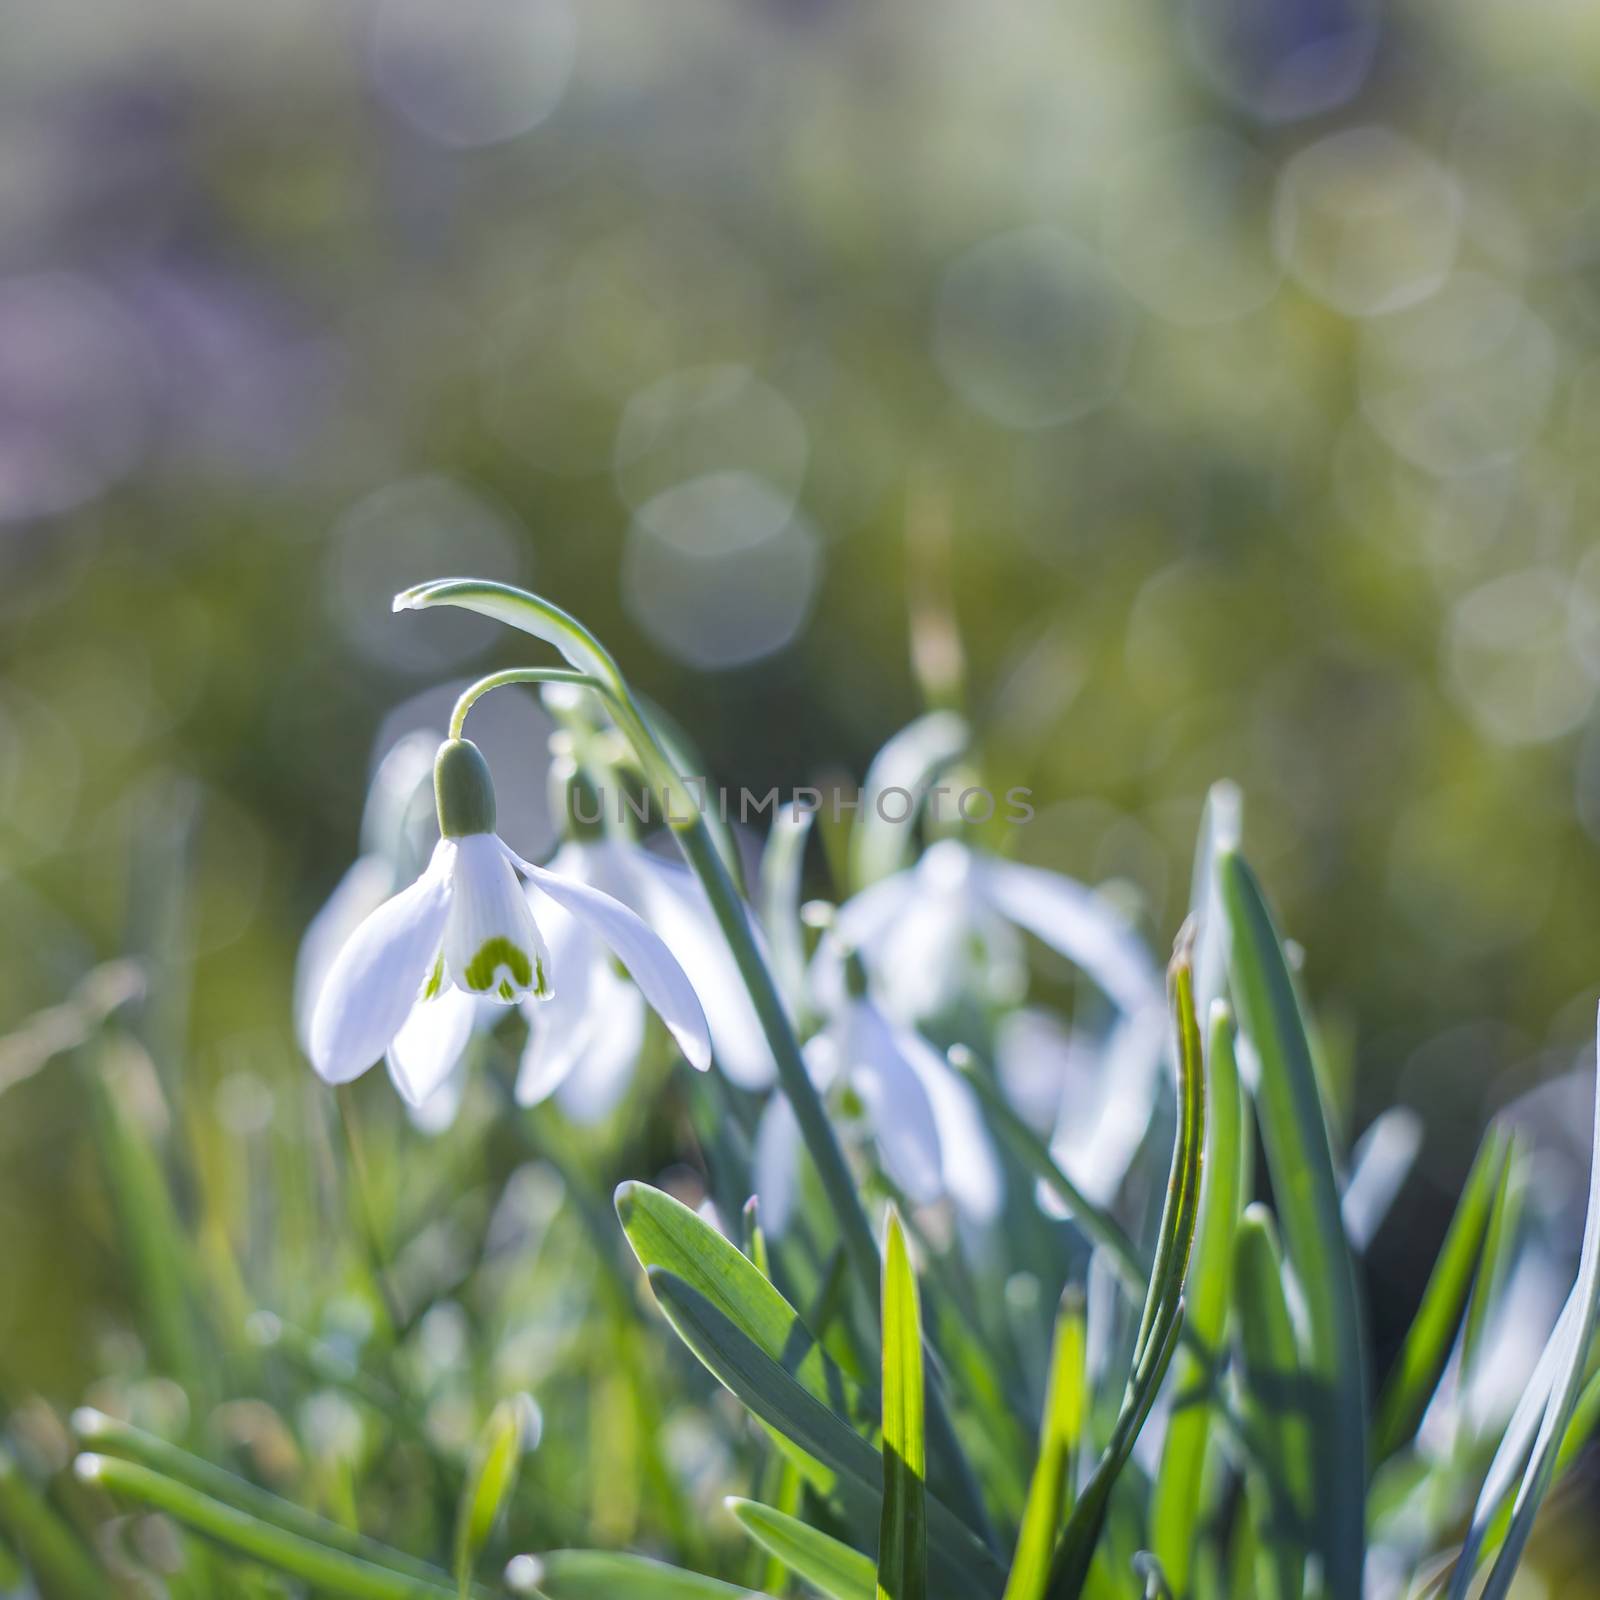 snowdrop - one of the first spring flowers